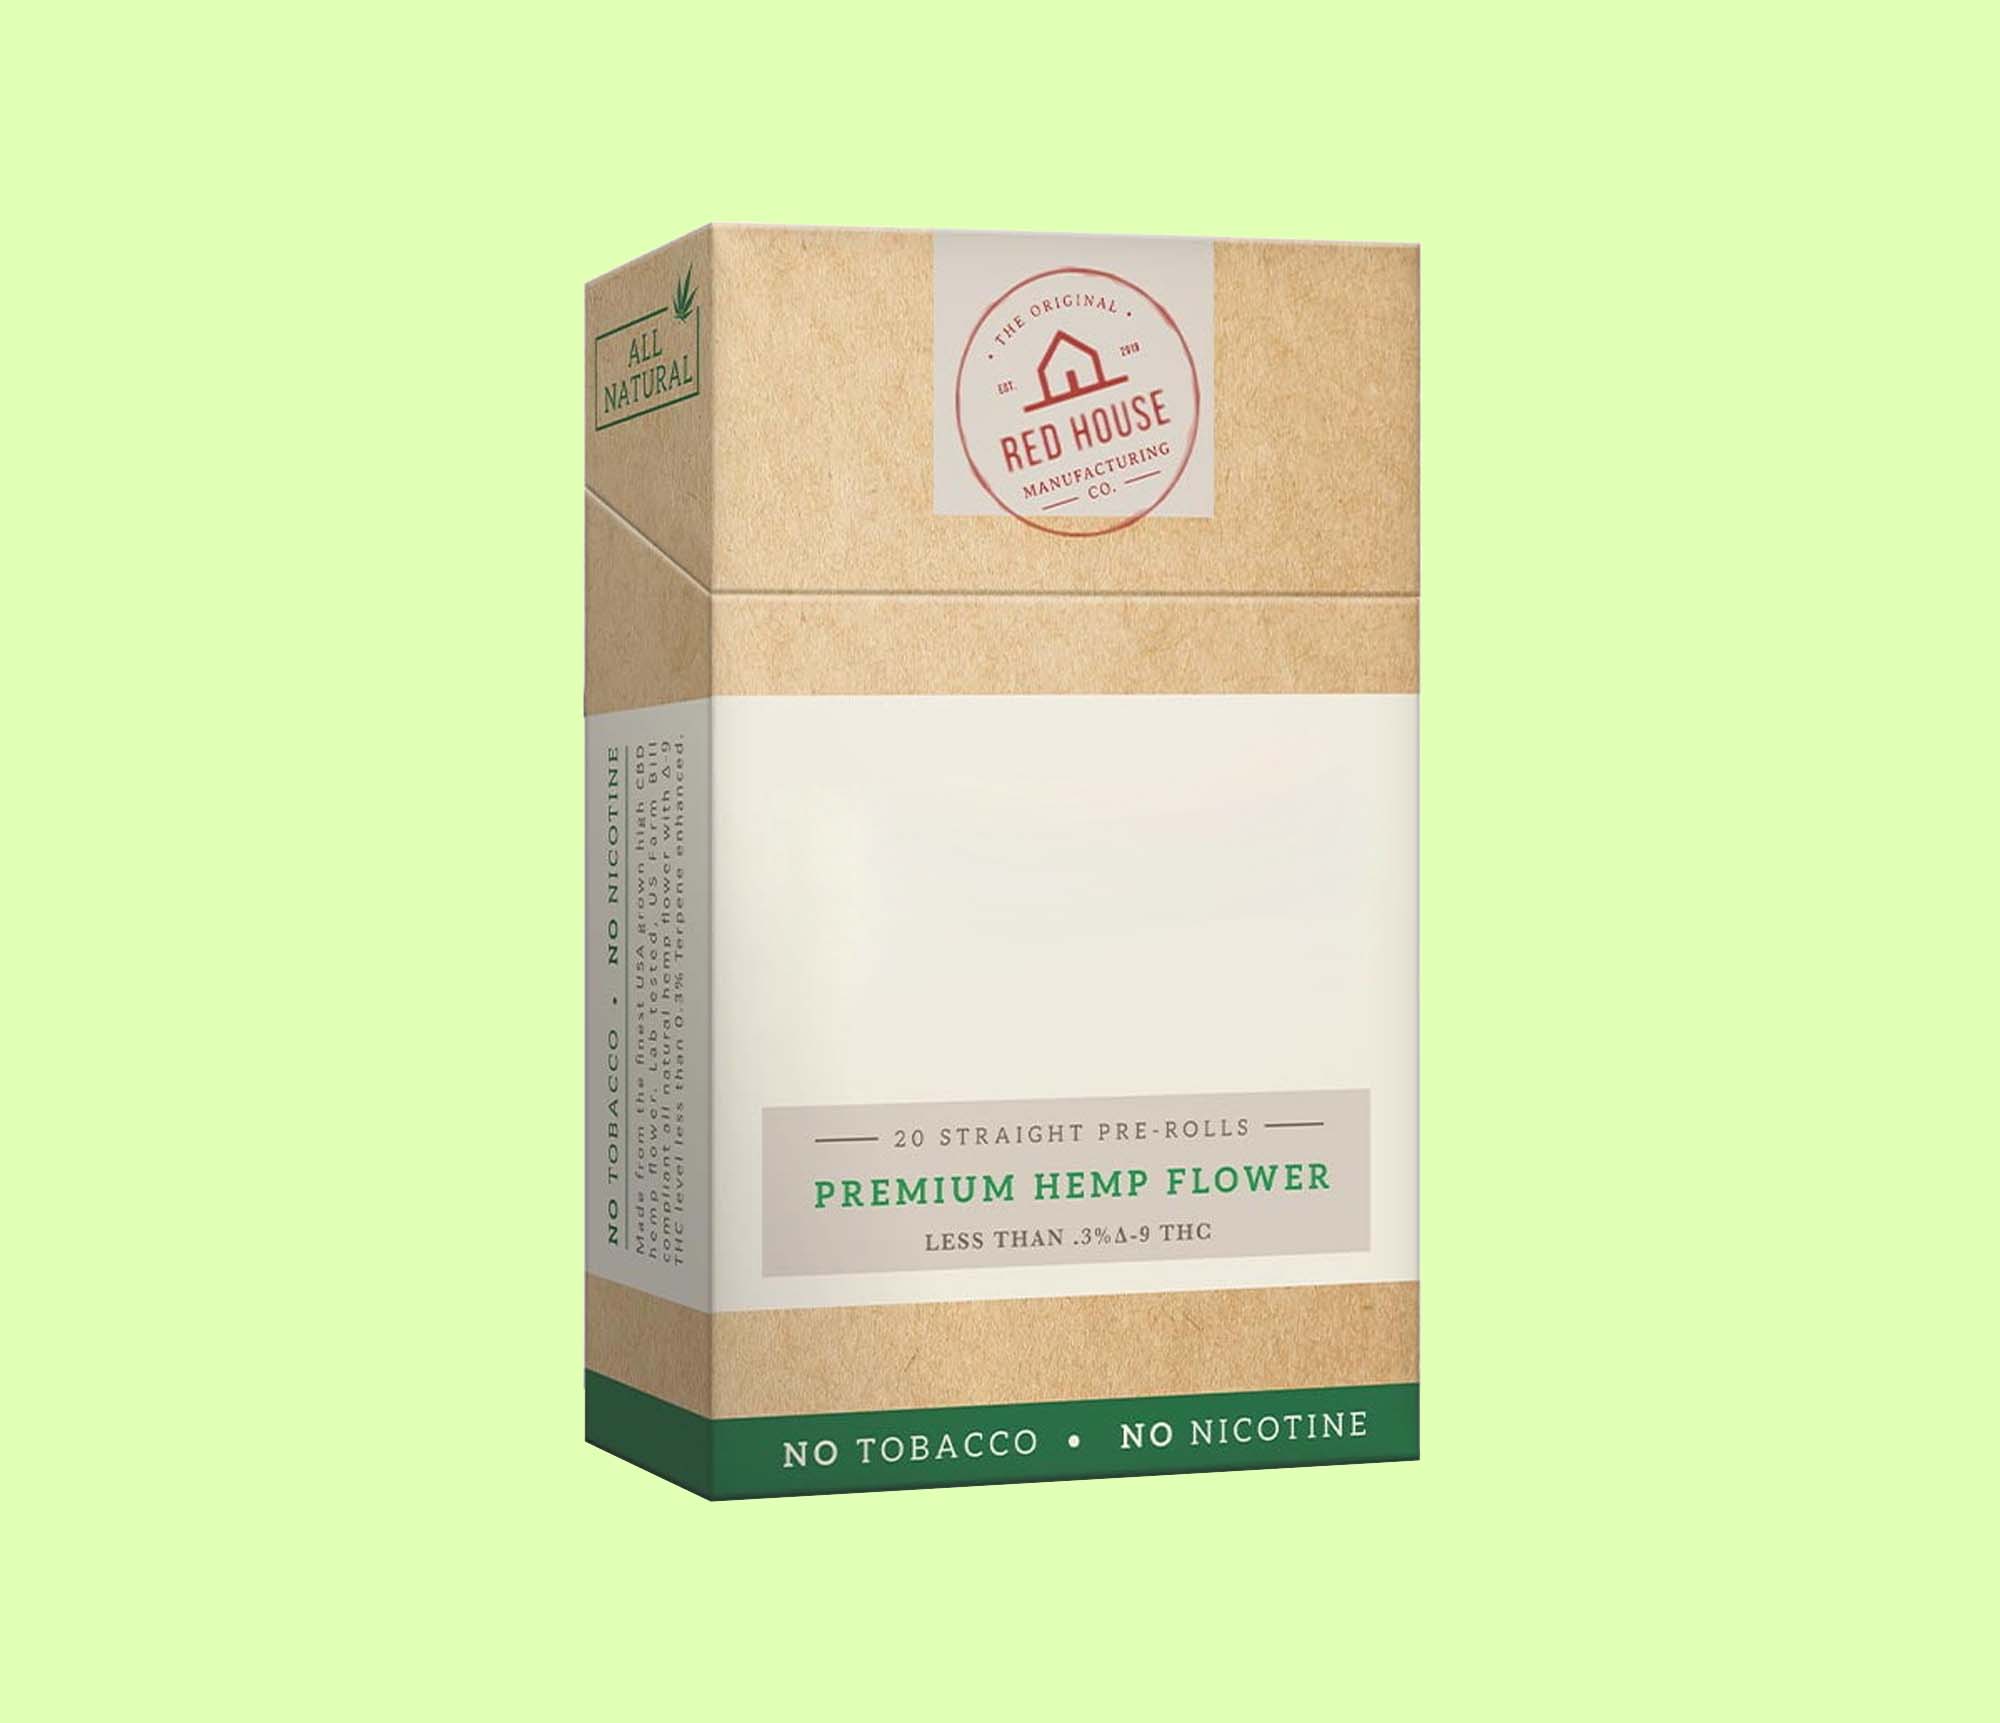  Cigarette Packaging Boxes